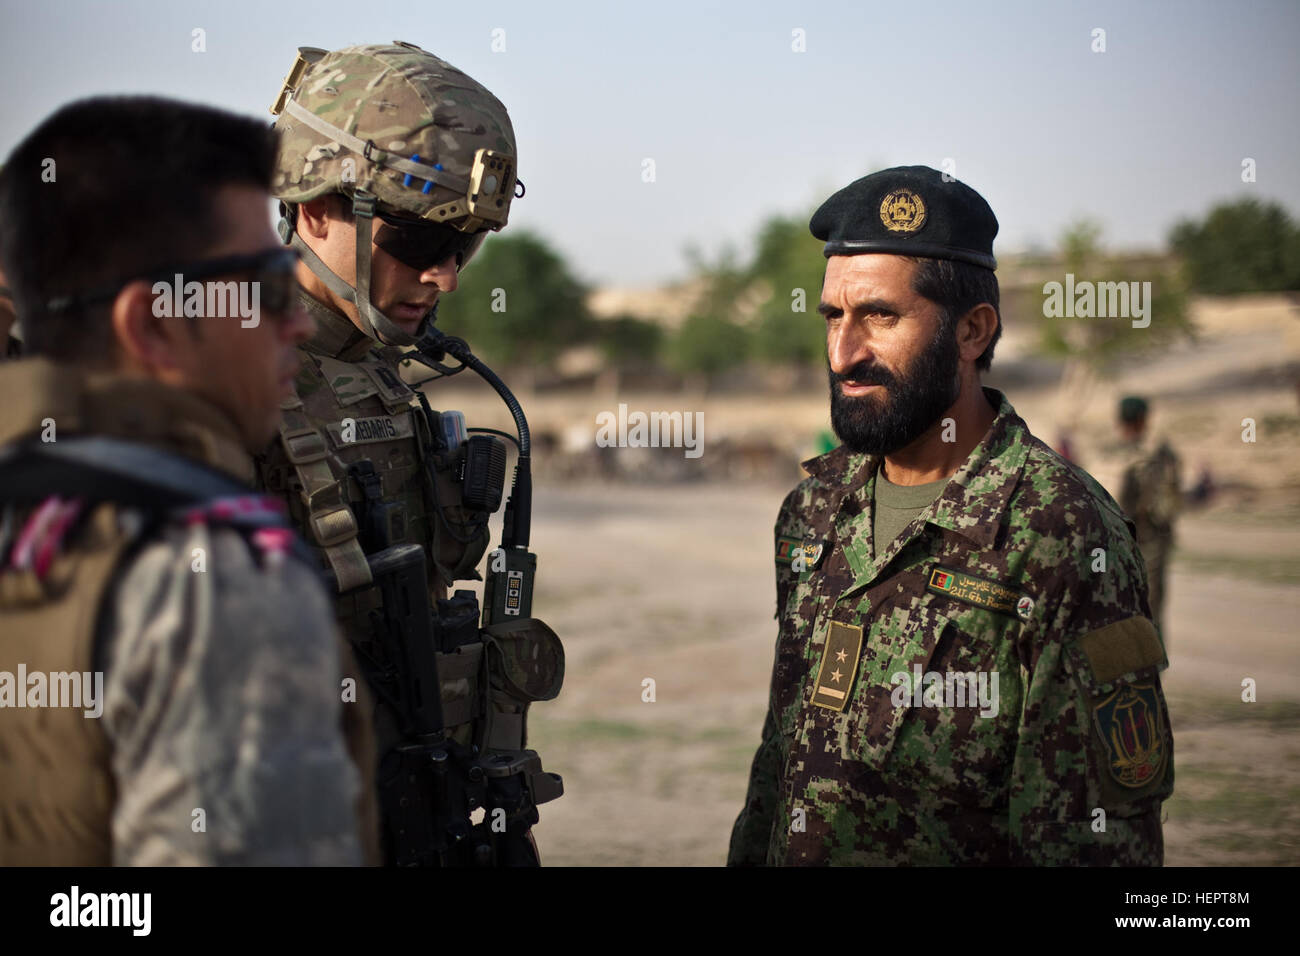 An Afghan National Army officer speaks to Charlie Company's commander during a clearing mission with U.S. Army soldiers assigned to Charlie Company, 1st Battalion, 24th Infantry Regiment, 2nd Brigade, 25th Infantry Division, to clear the village of Nawrak, Afghanistan, June 26, 2011. The Afghan National Police actively search the houses in the village while the Afghan National Army and U.S. Army soldiers provide security. Kalat District ANP patrol in Nawrak 110626-A-UJ825-033 Stock Photo